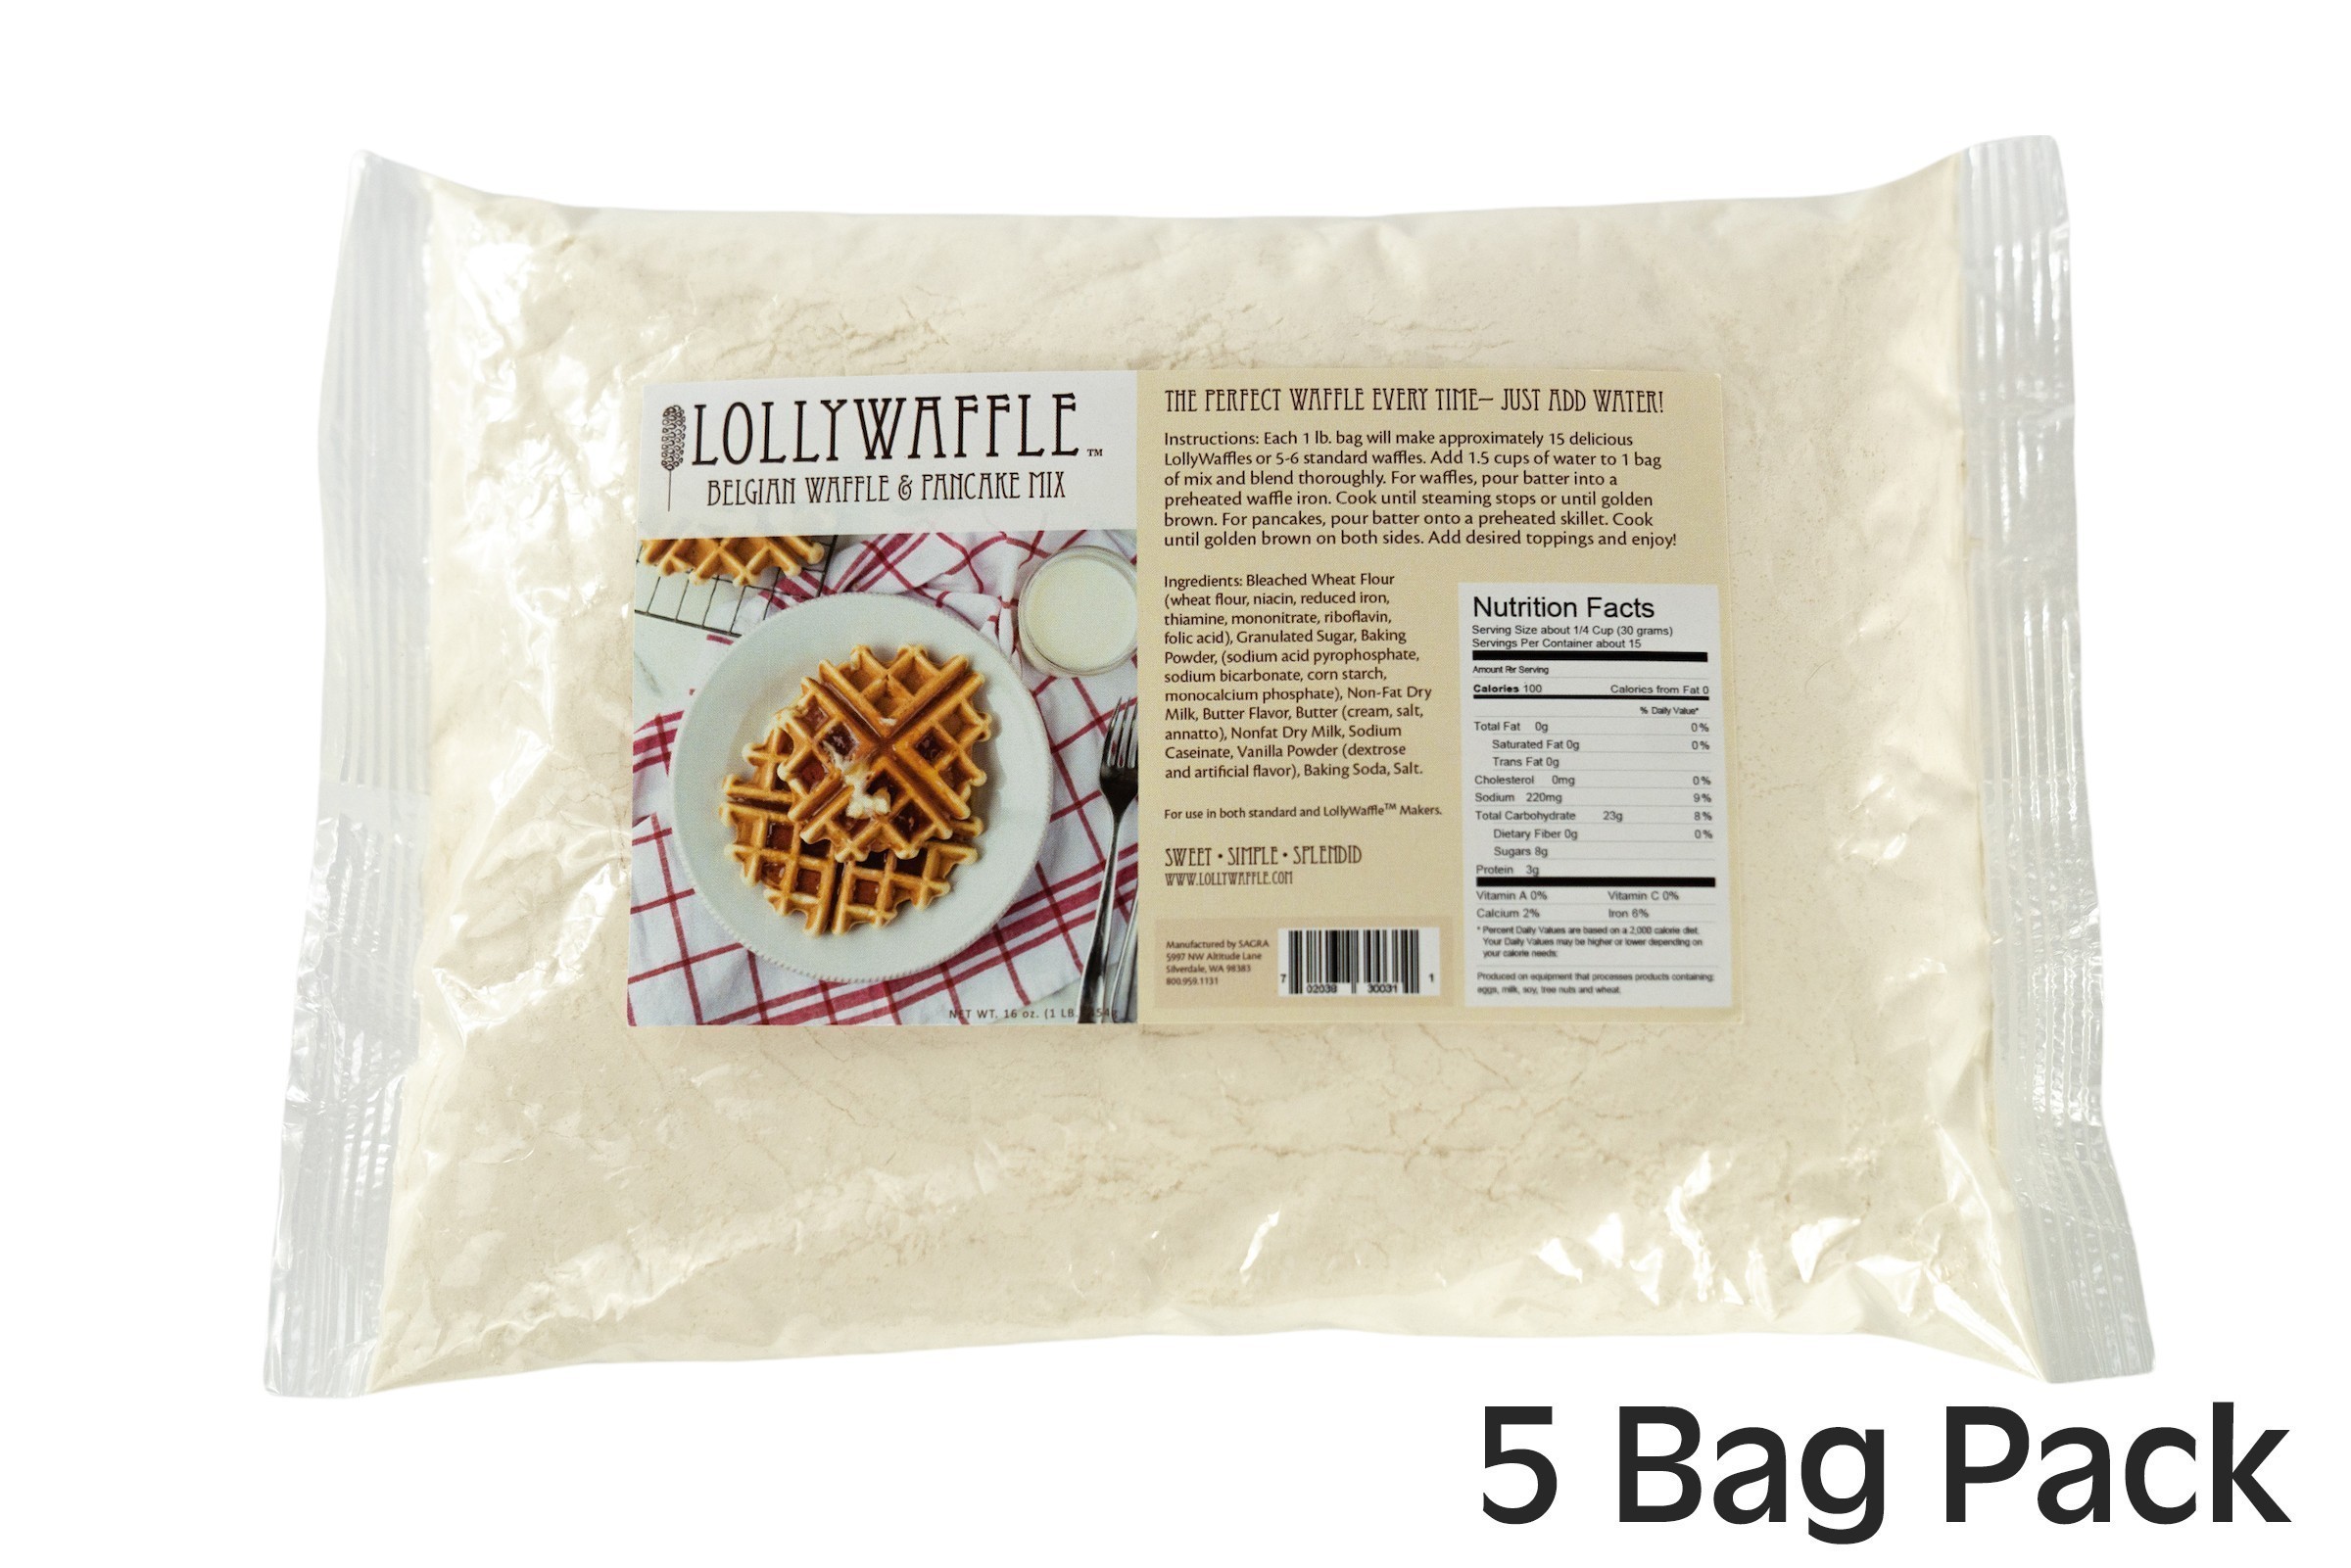 Just Add Water Belgian Waffle and Pancake Mix by LollyWaffle - 5 lbs.